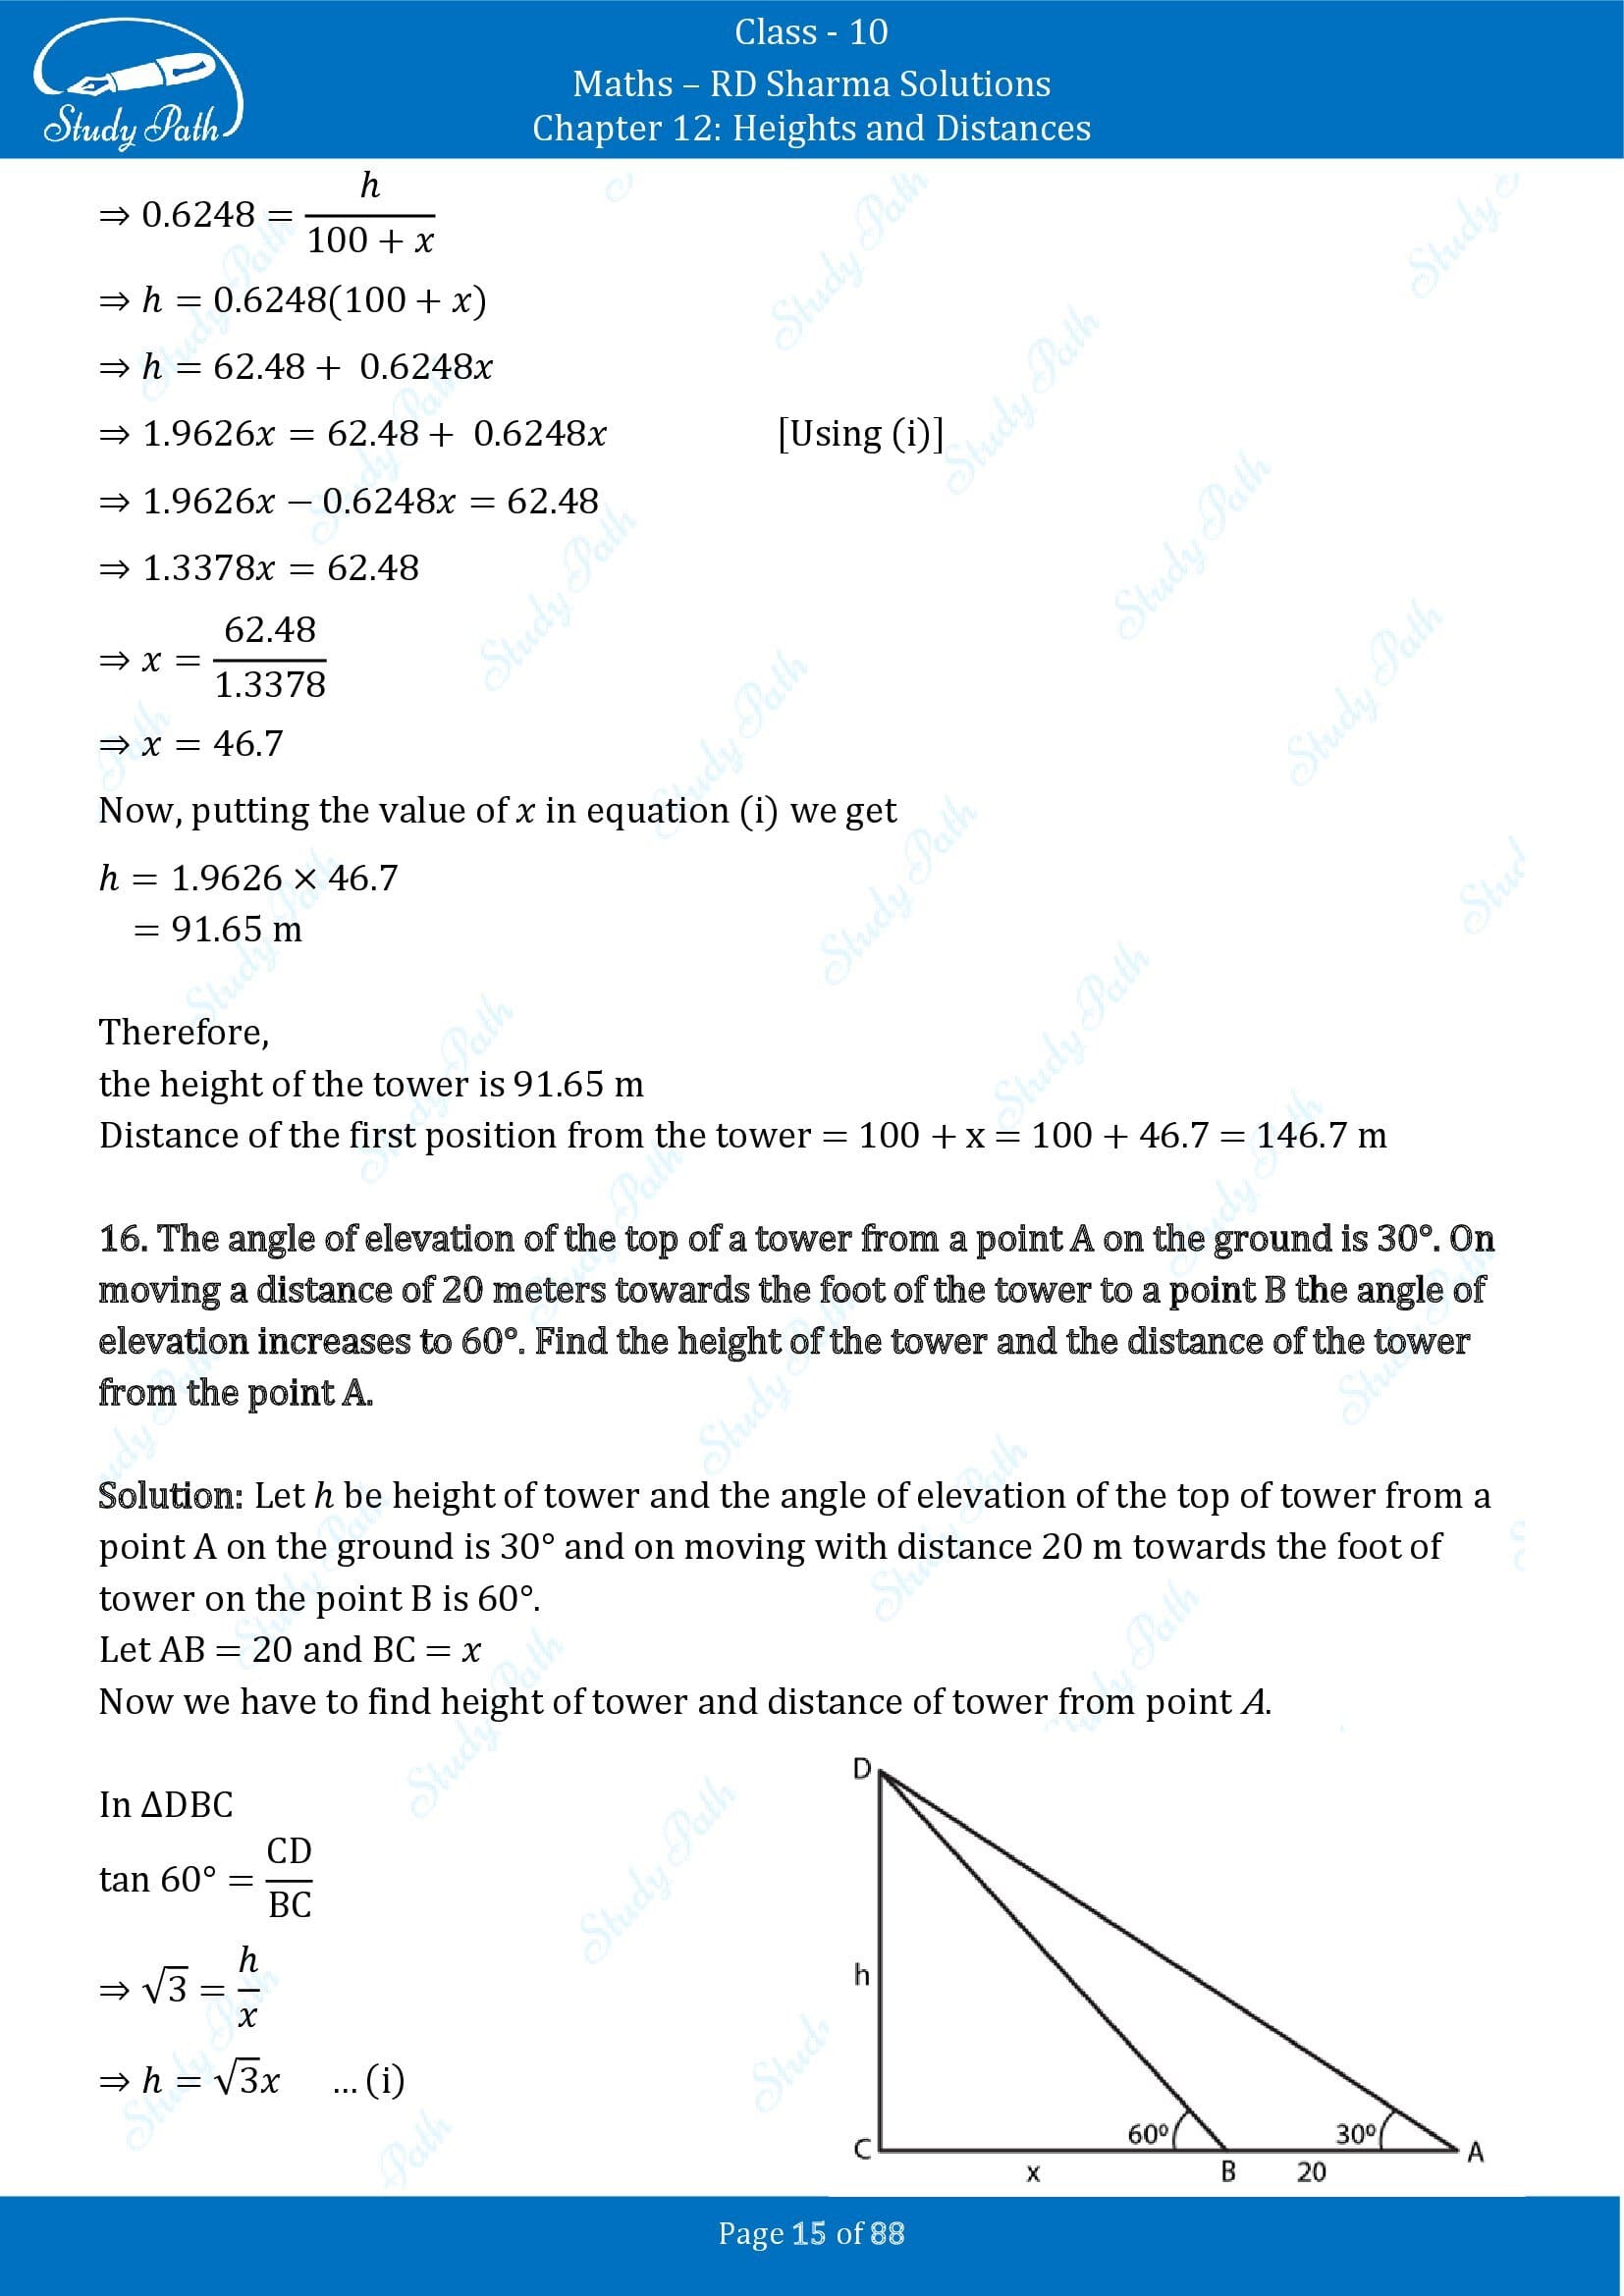 RD Sharma Solutions Class 10 Chapter 12 Heights and Distances Exercise 12.1 00015